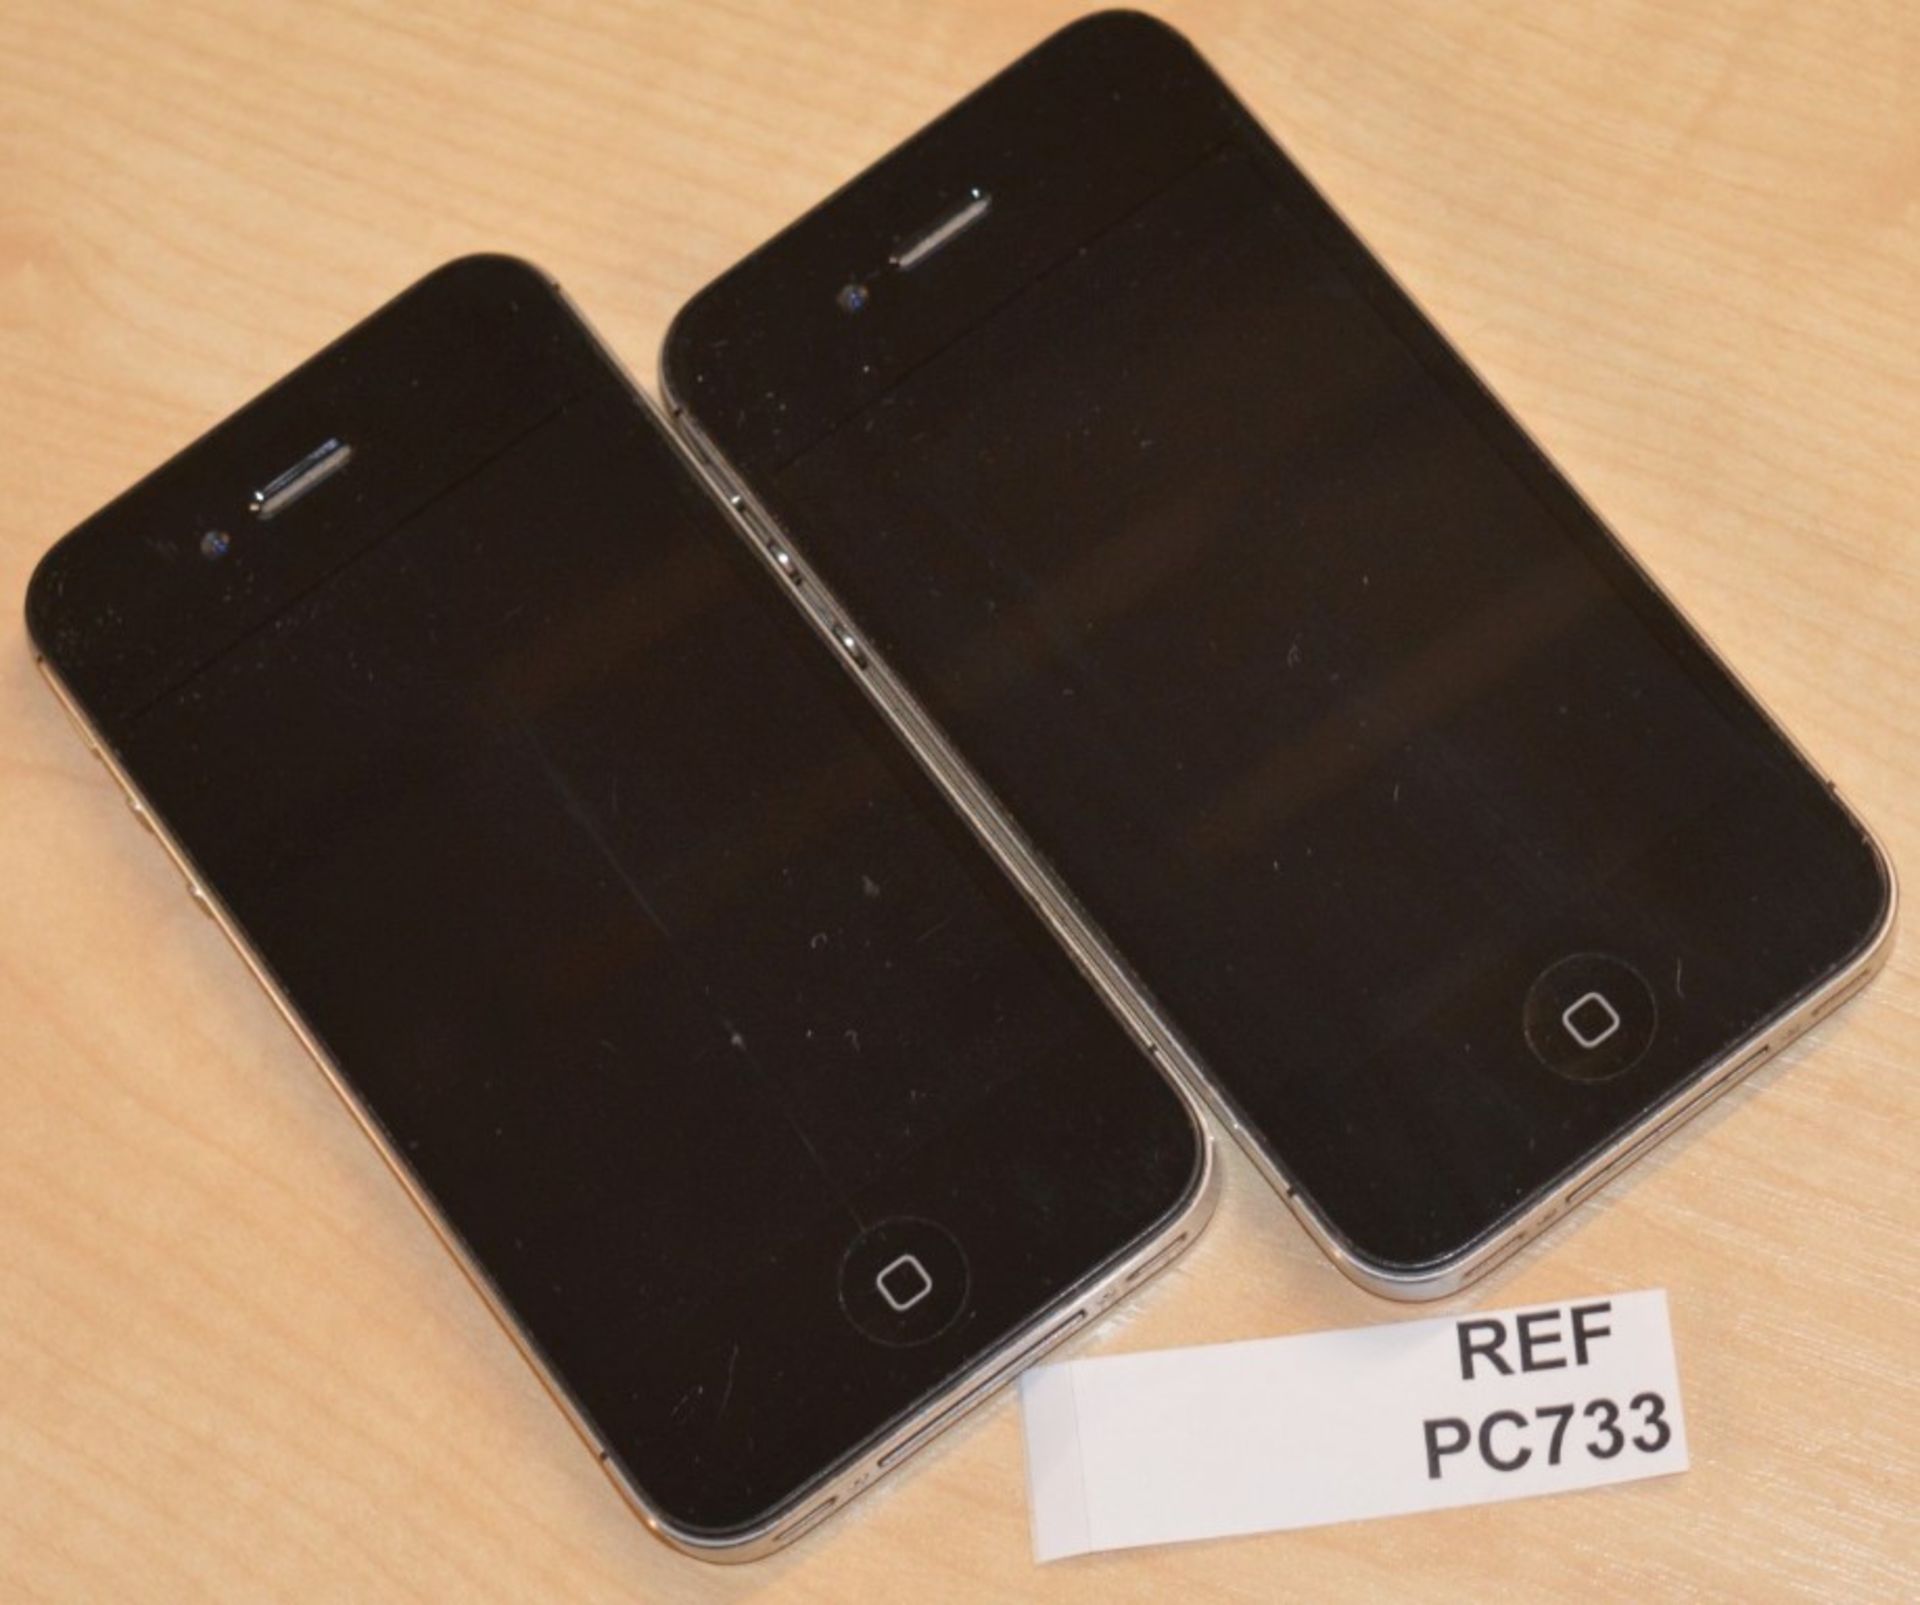 2 x Apple Iphone 4 Handsets - Handsets Only - For Spares or Repairs - One Has Cracked Screen and - Image 2 of 3